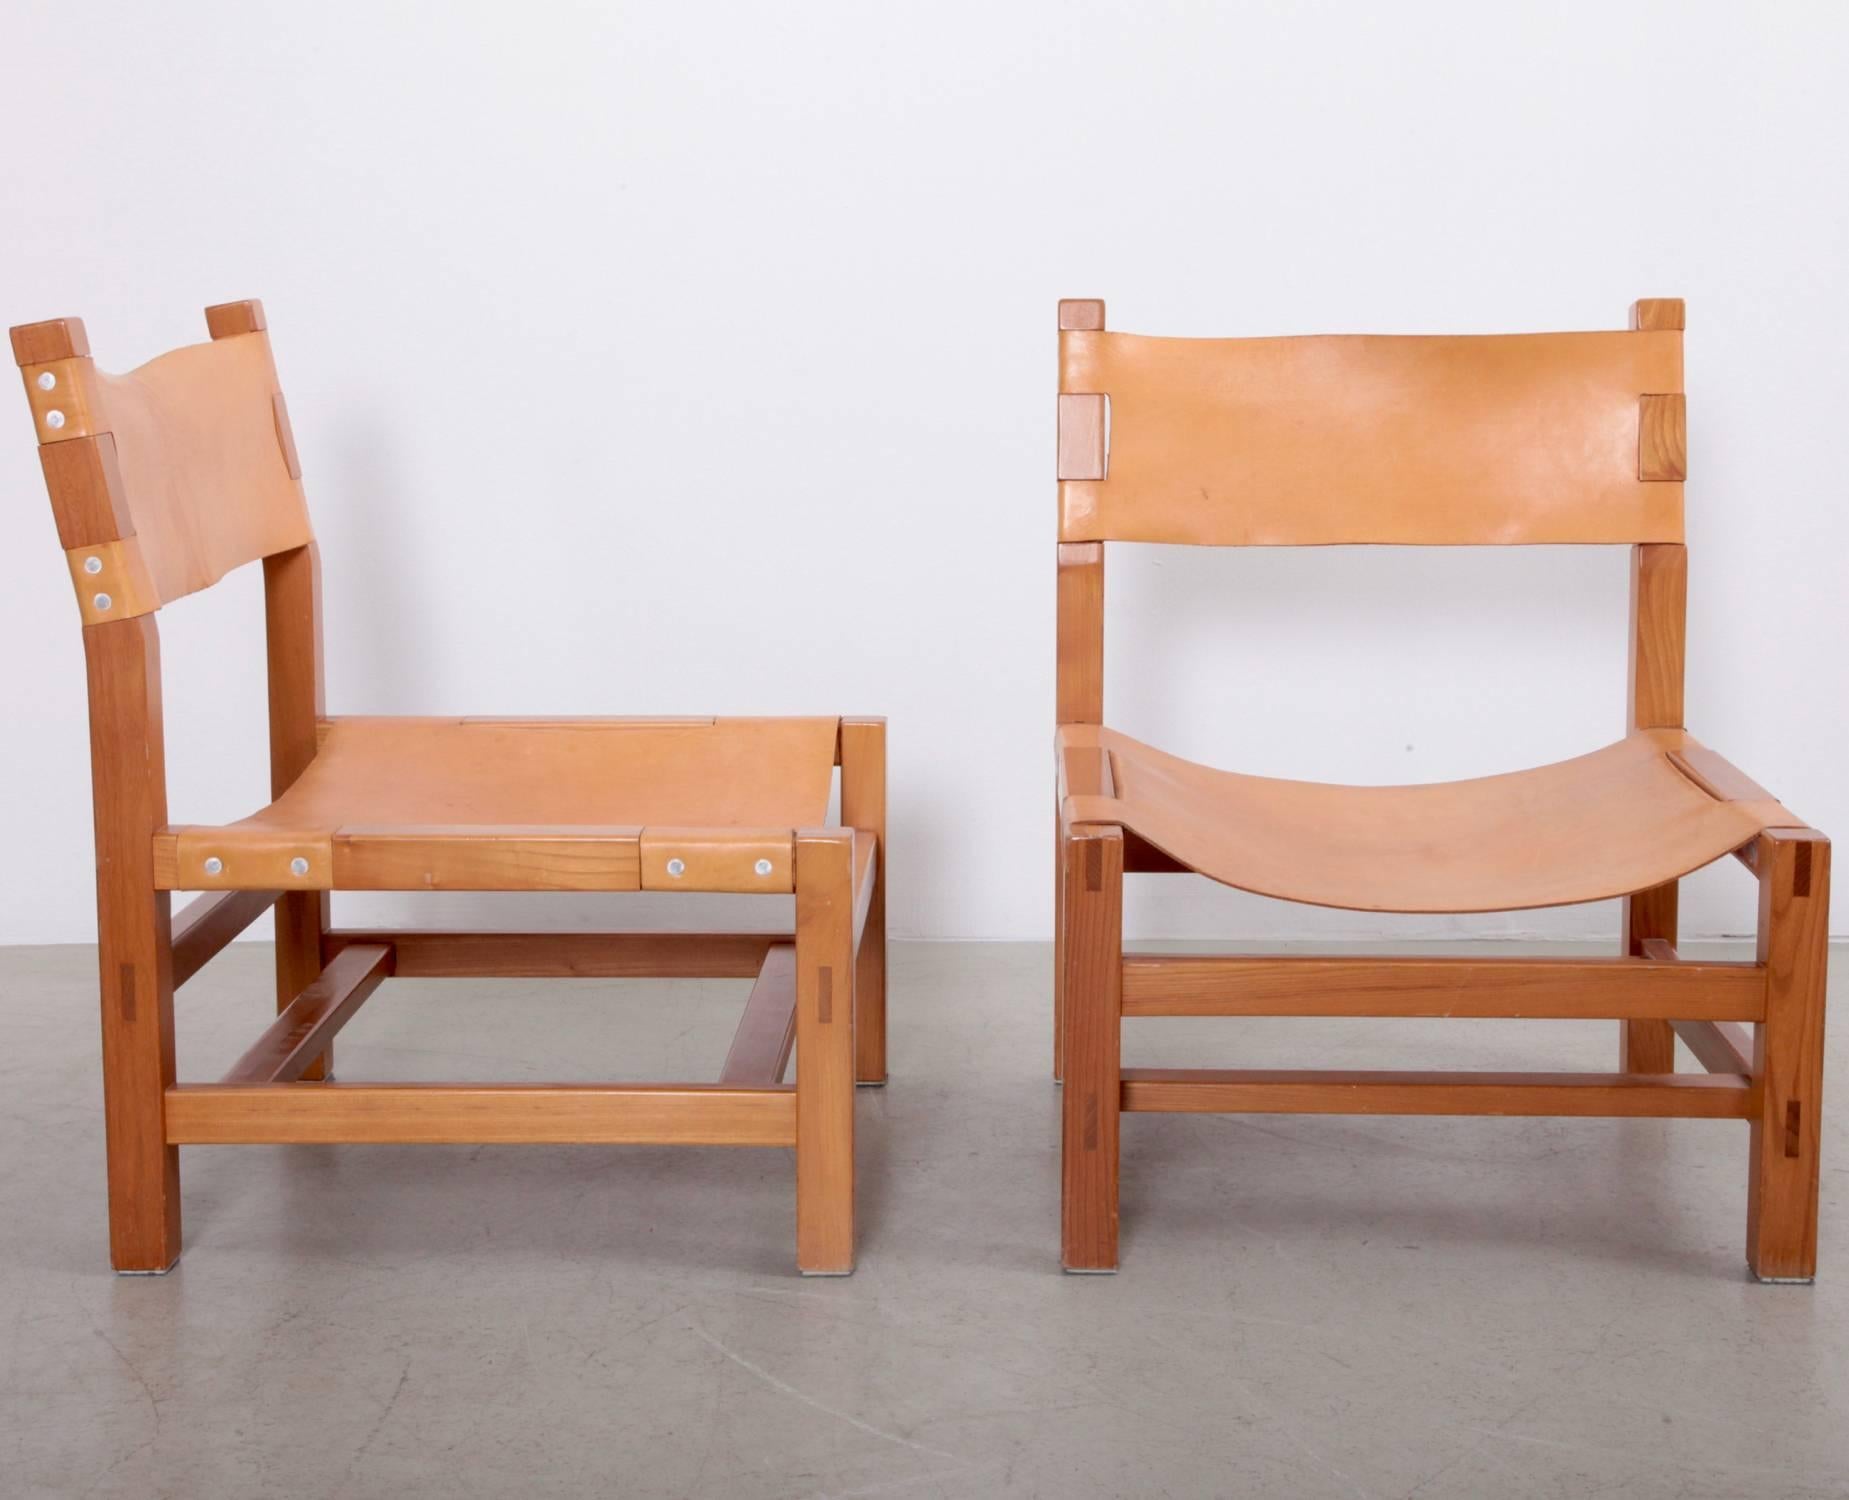 French Pair of Signed Maison Regain Lounge Chairs in Original Condition, France, 1970s